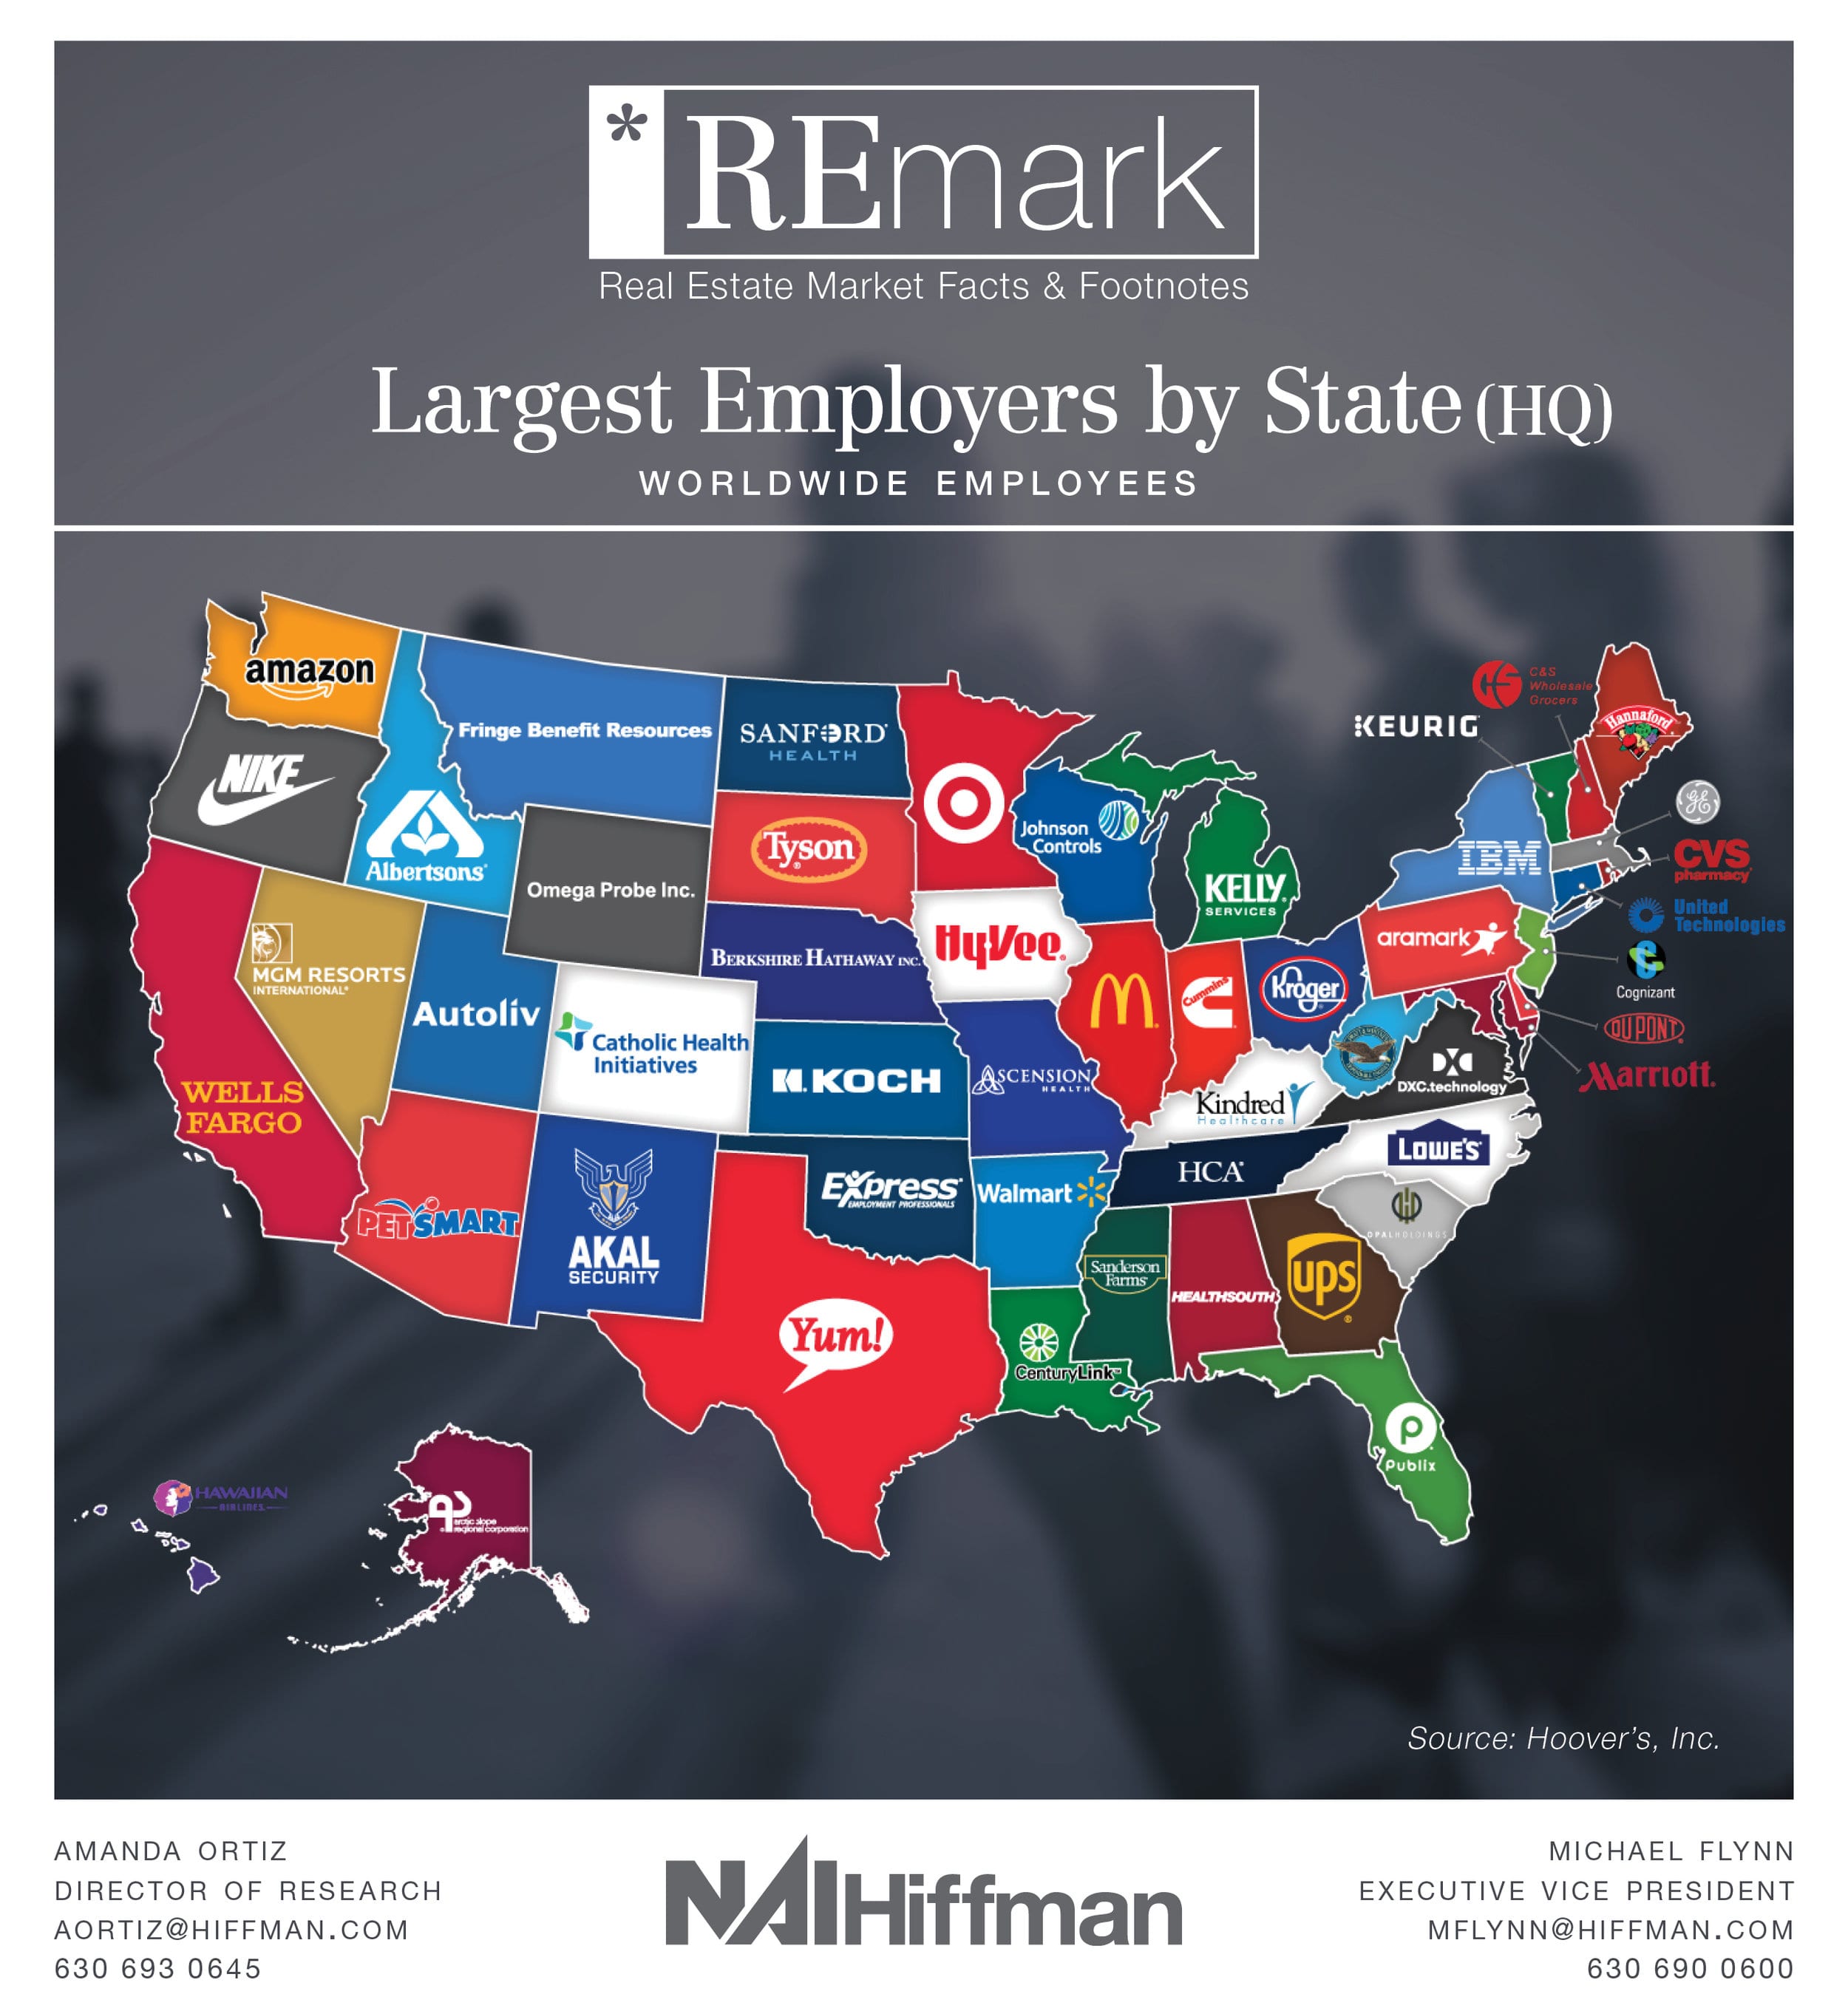 REmark: Largest Employers by State (HQ)